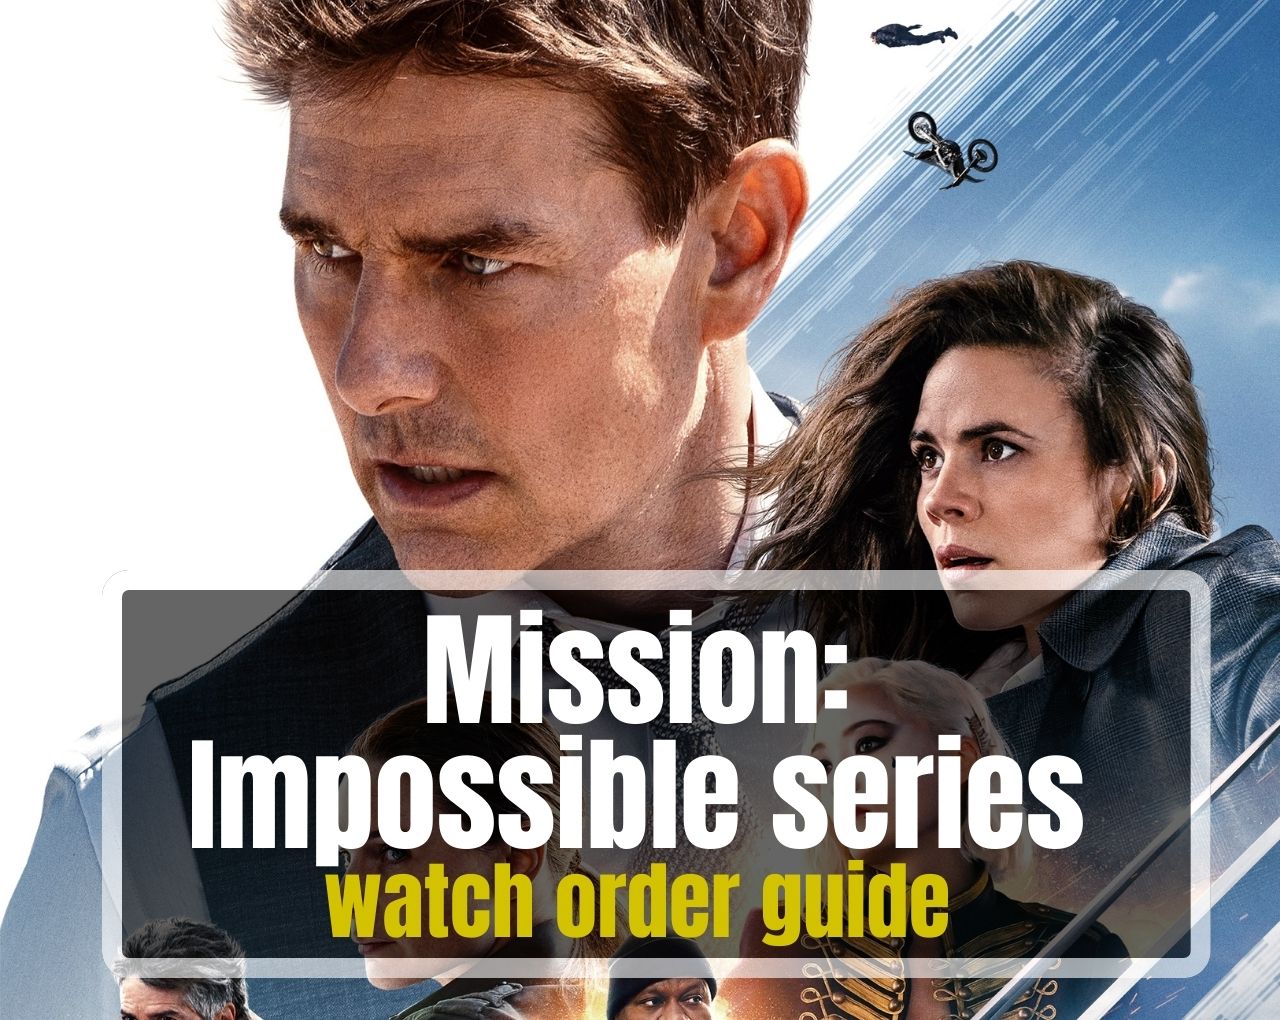 Mission Impossible Series watch order guide